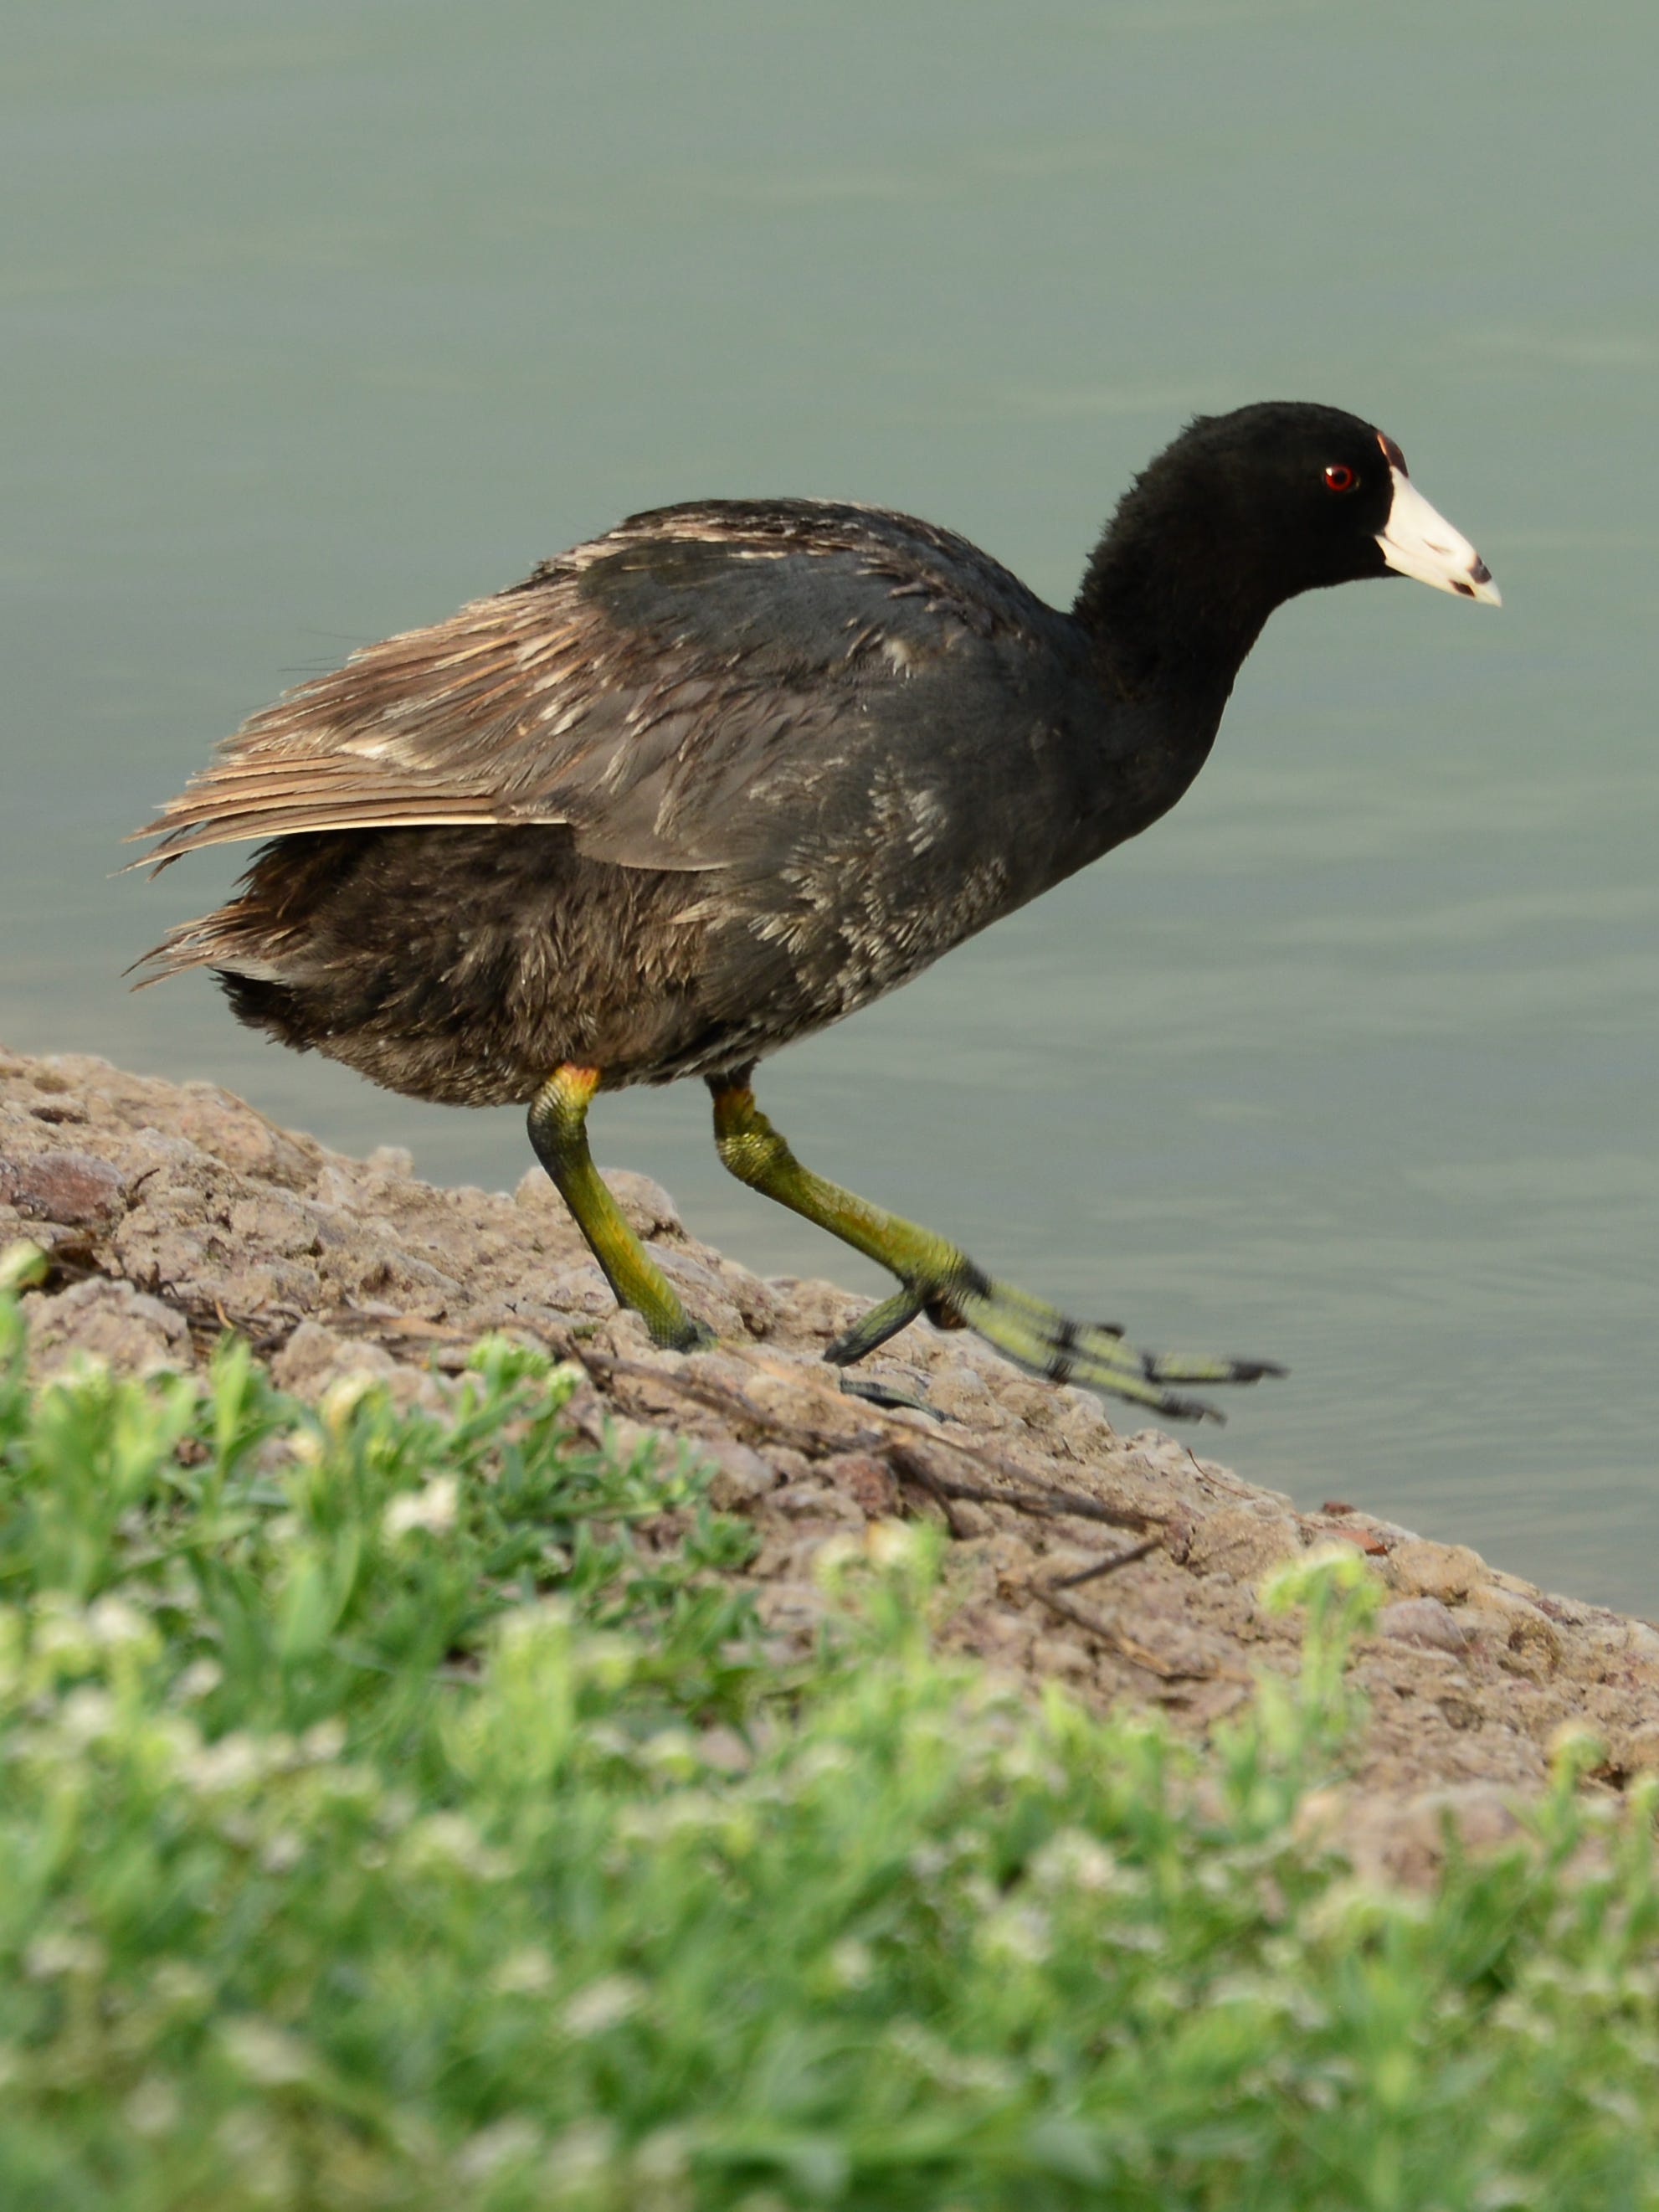 What the heck is a coot? (Nope, not a duck. Guess